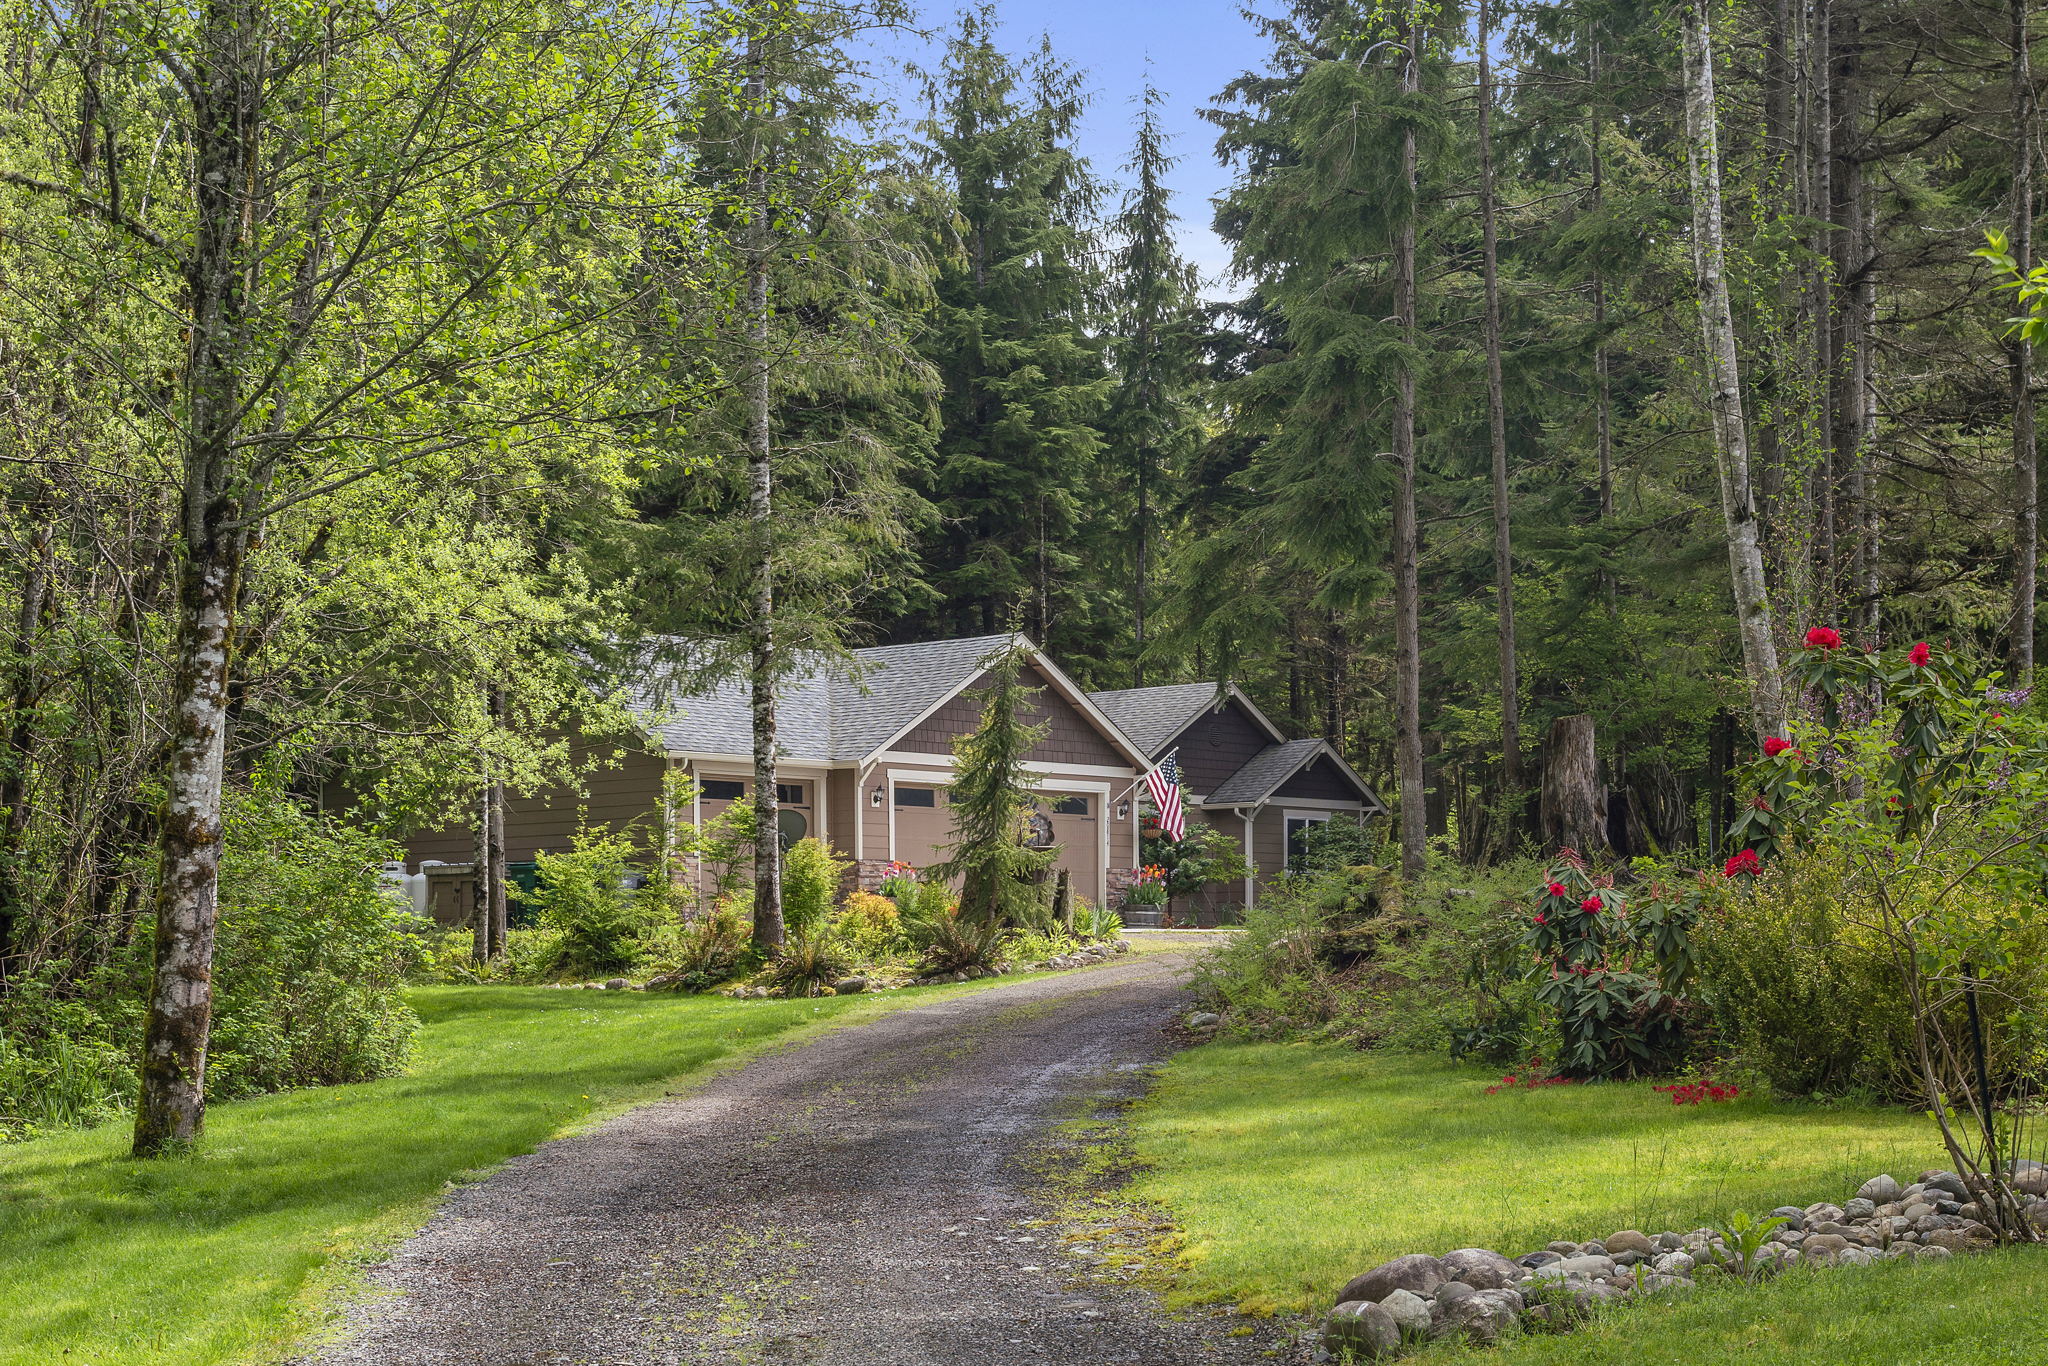 Drive down your own private lane to your 1.2+ acre secluded property!